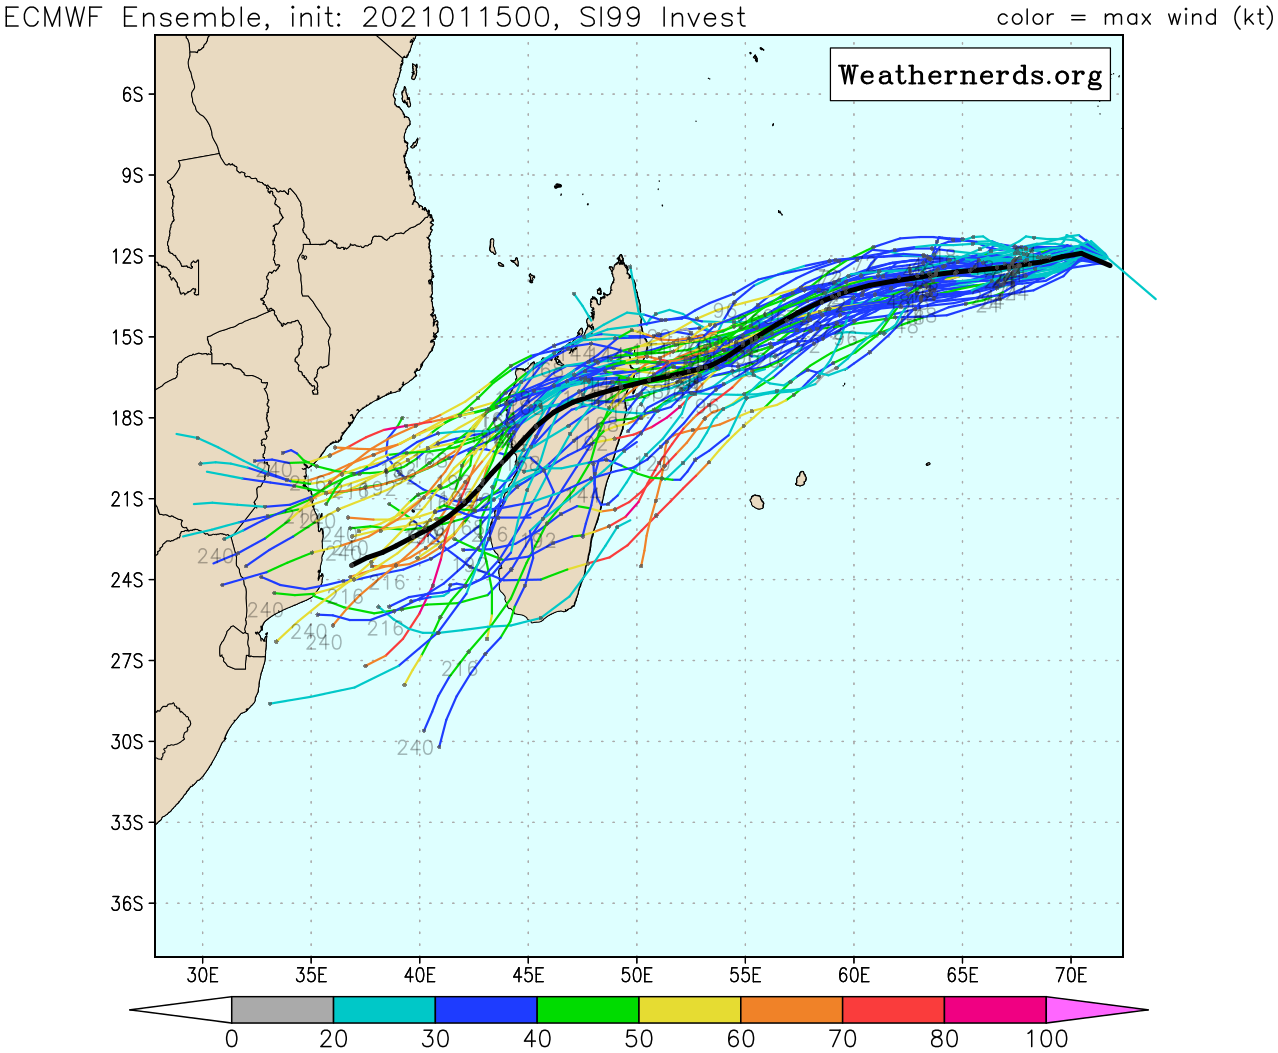 INVEST 99S: ECMWF AND GFS ARE PRETTY CLOSE TRACK-WISE AND AS FAR AS THE INTENSITY TREND IS CONCERNED.